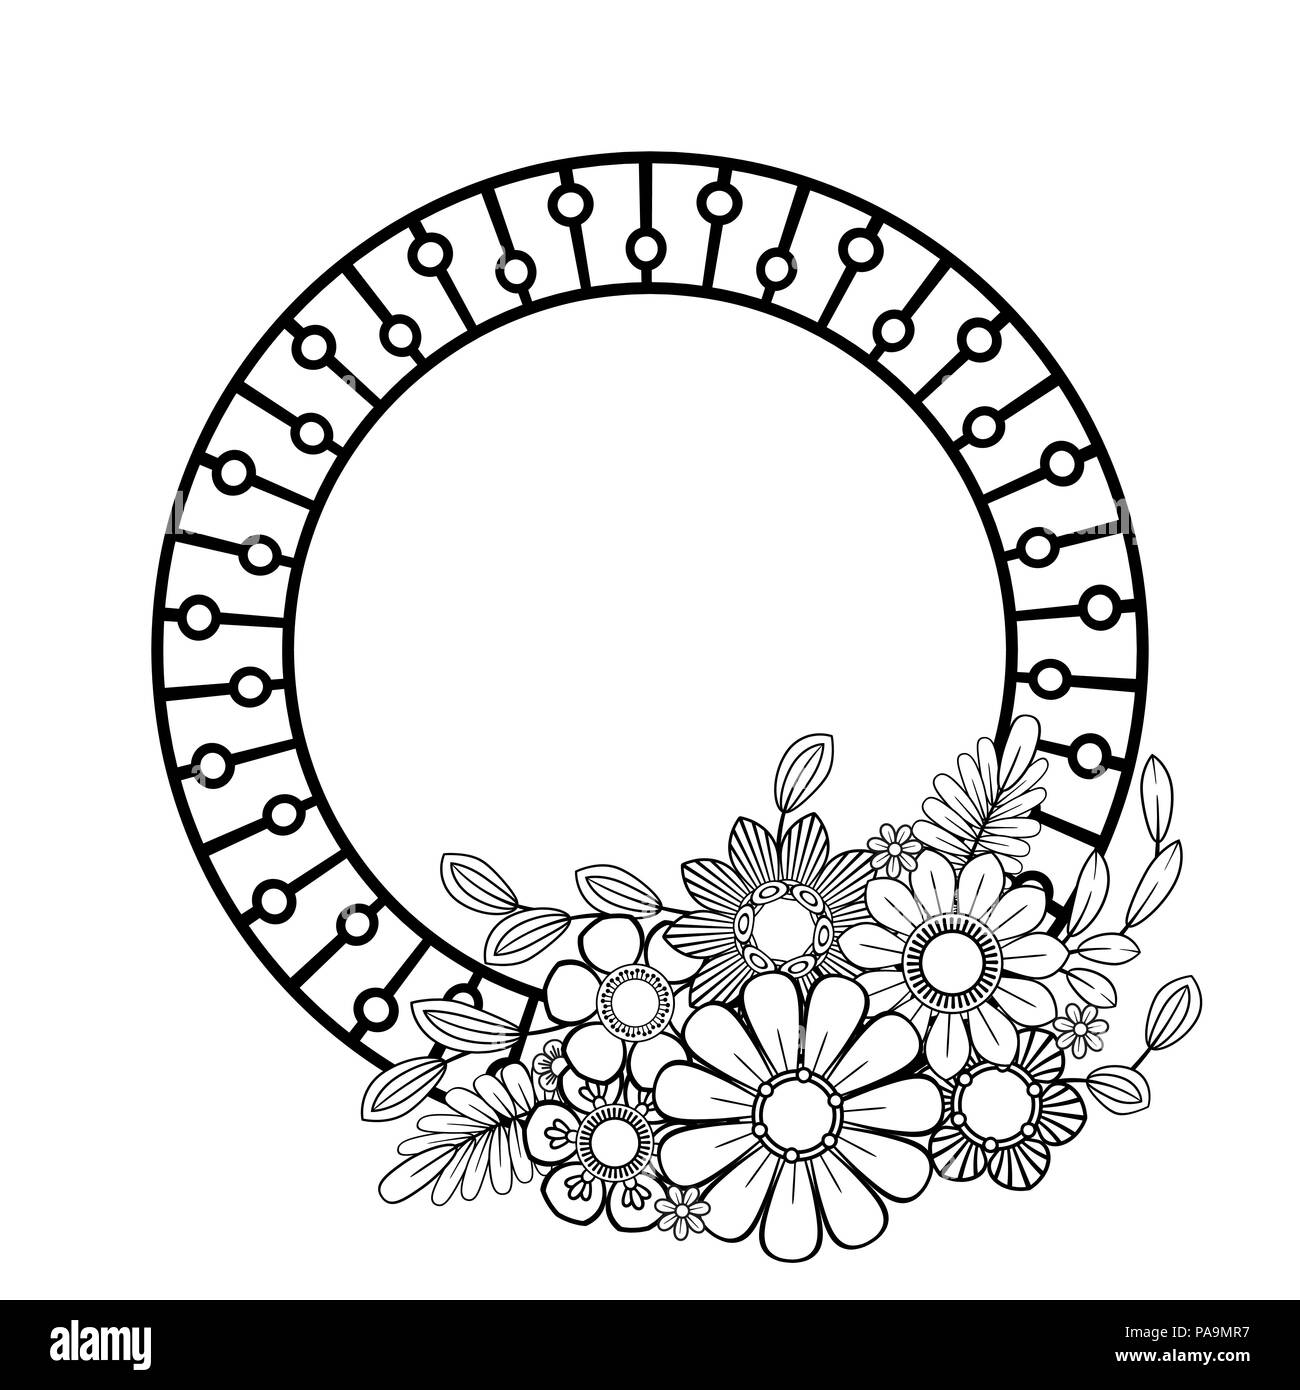 Flowers decorative frame. Isolated on white background. Floral monochrome ornament. Black and white vector illustration. Stock Vector